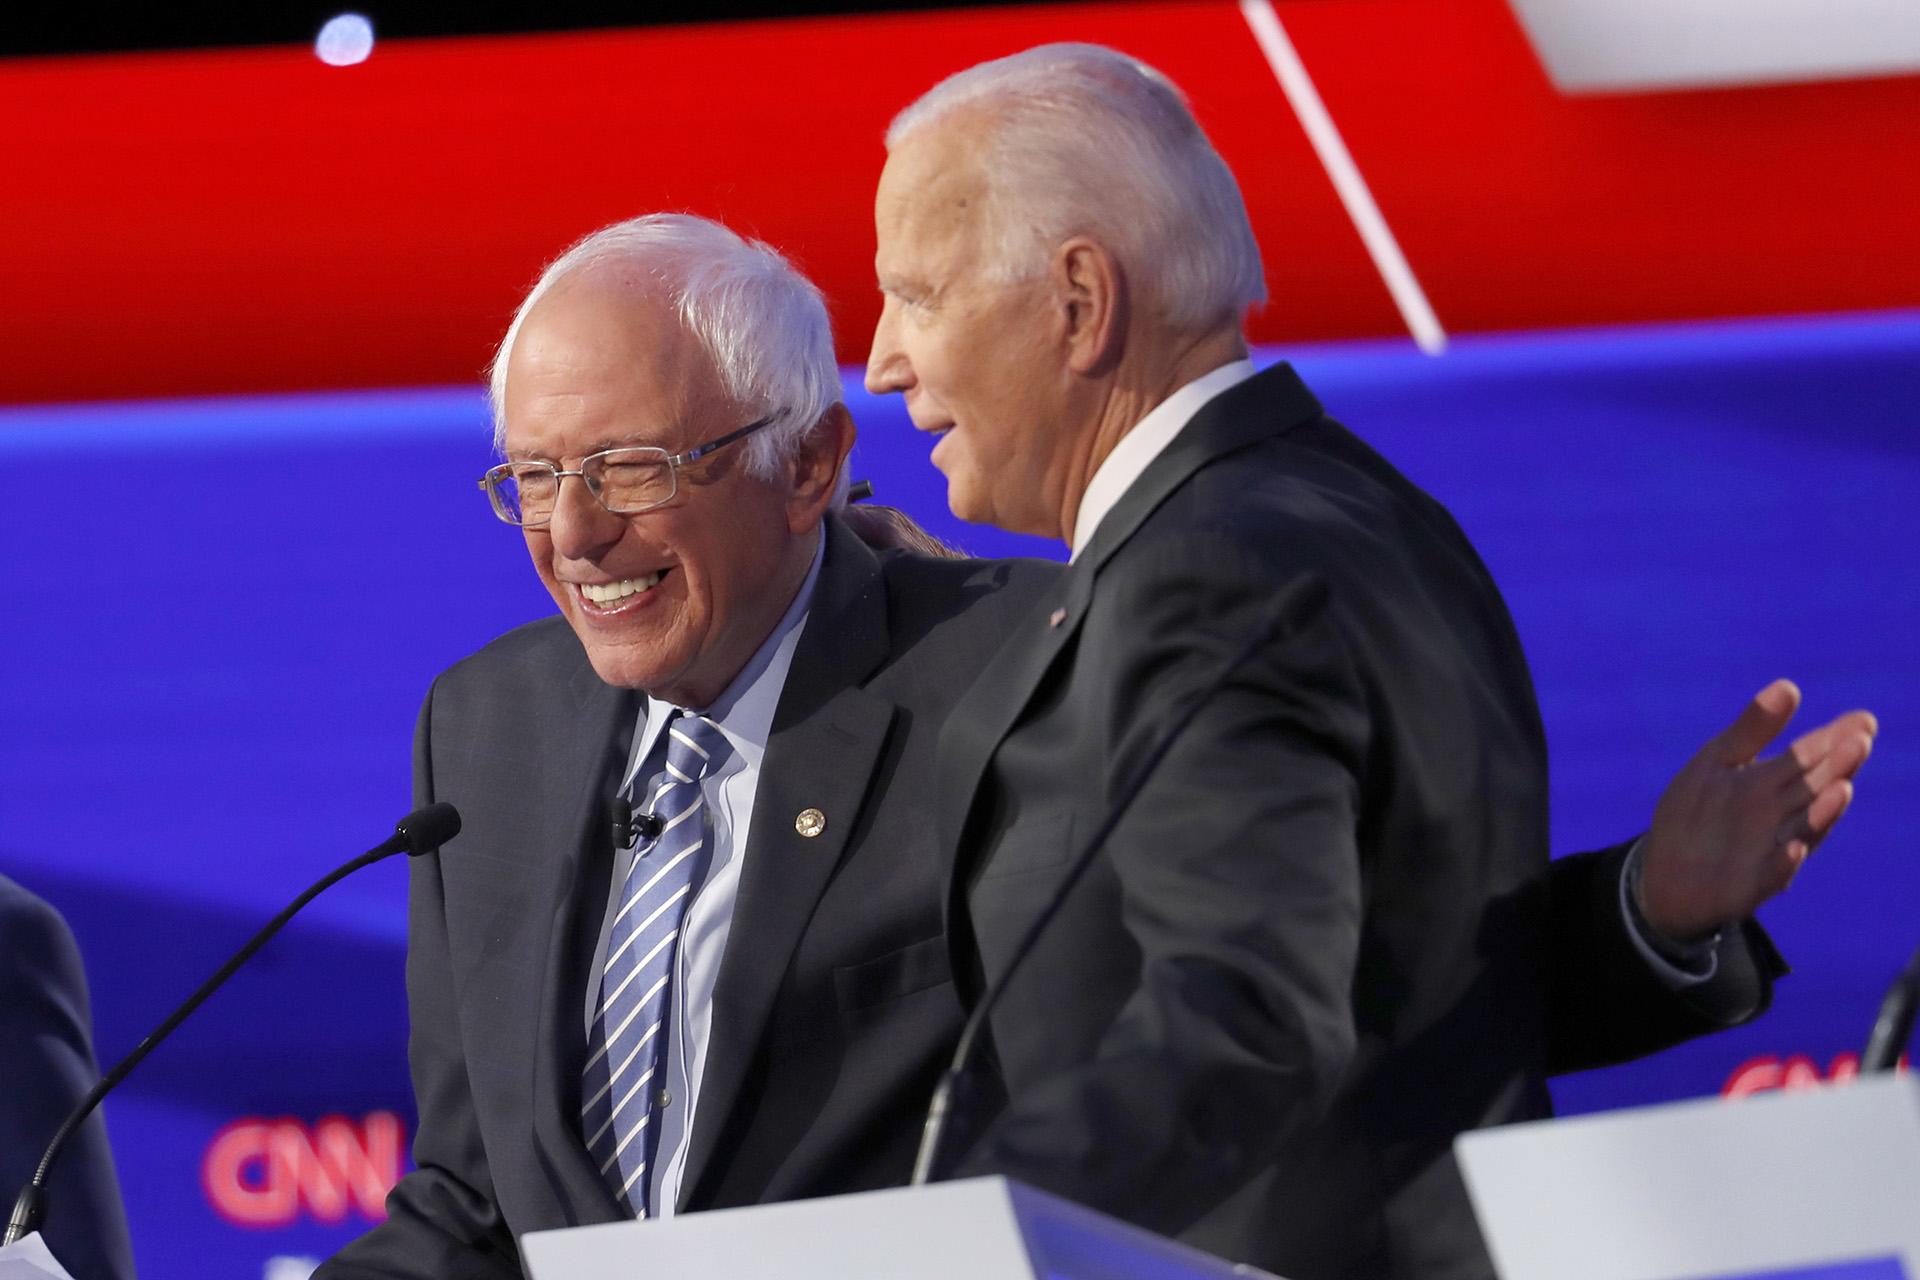 Democratic presidential candidate Sen. Bernie Sanders, I-Vt., left, and former Vice President Joe Biden hug during a Democratic presidential primary debate hosted by CNN/New York Times at Otterbein University, Tuesday, Oct. 15, 2019, in Westerville, Ohio. (AP Photo / John Minchillo)